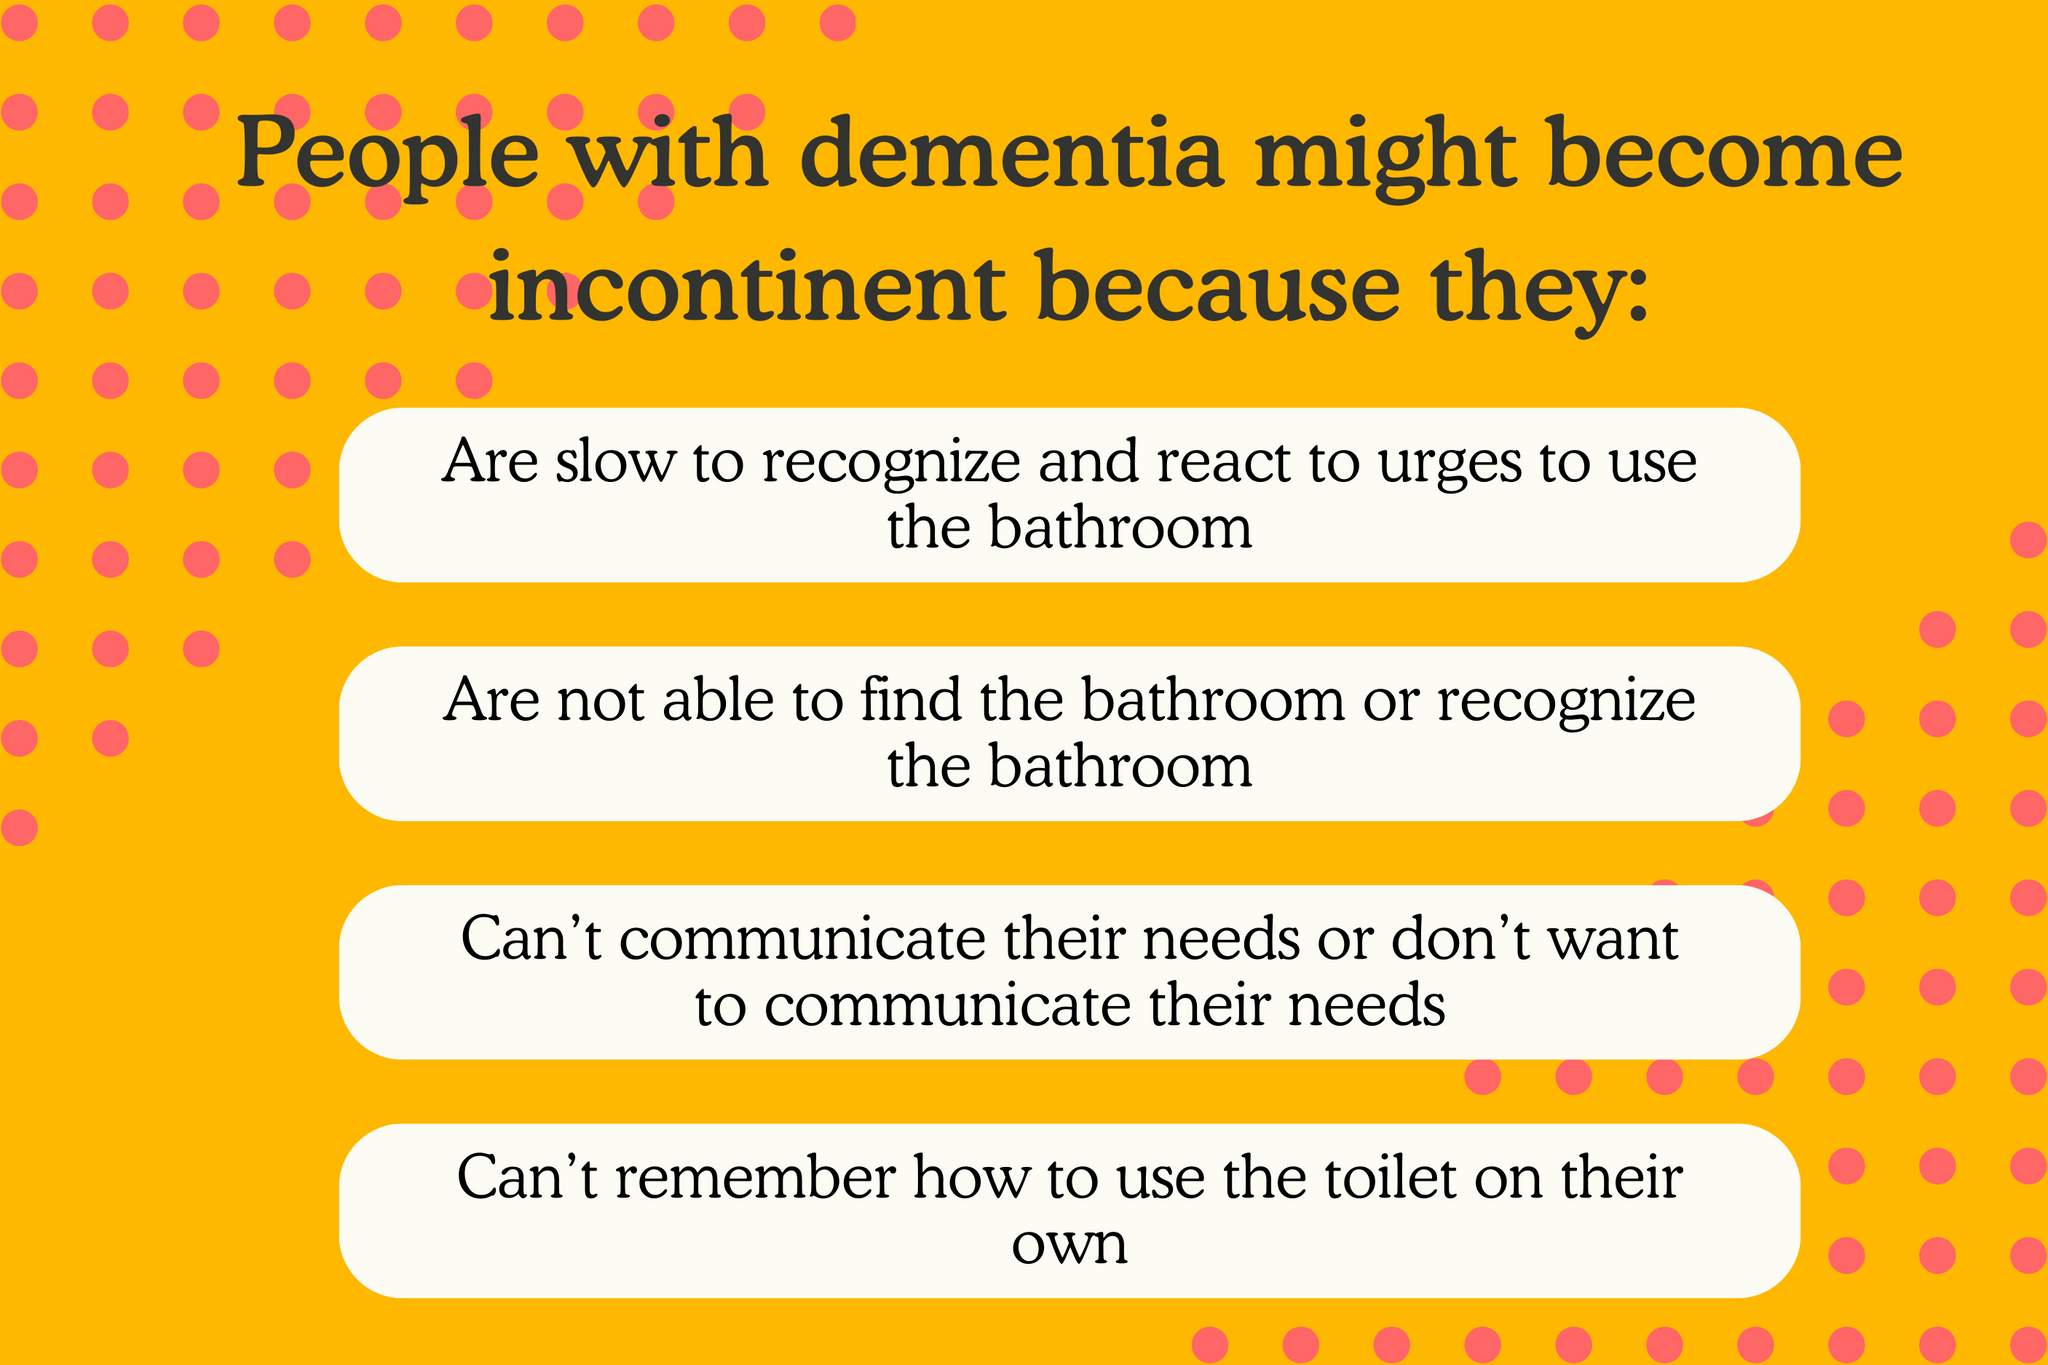 An infographic explaining the reasons someone with dementia might become incontinent.